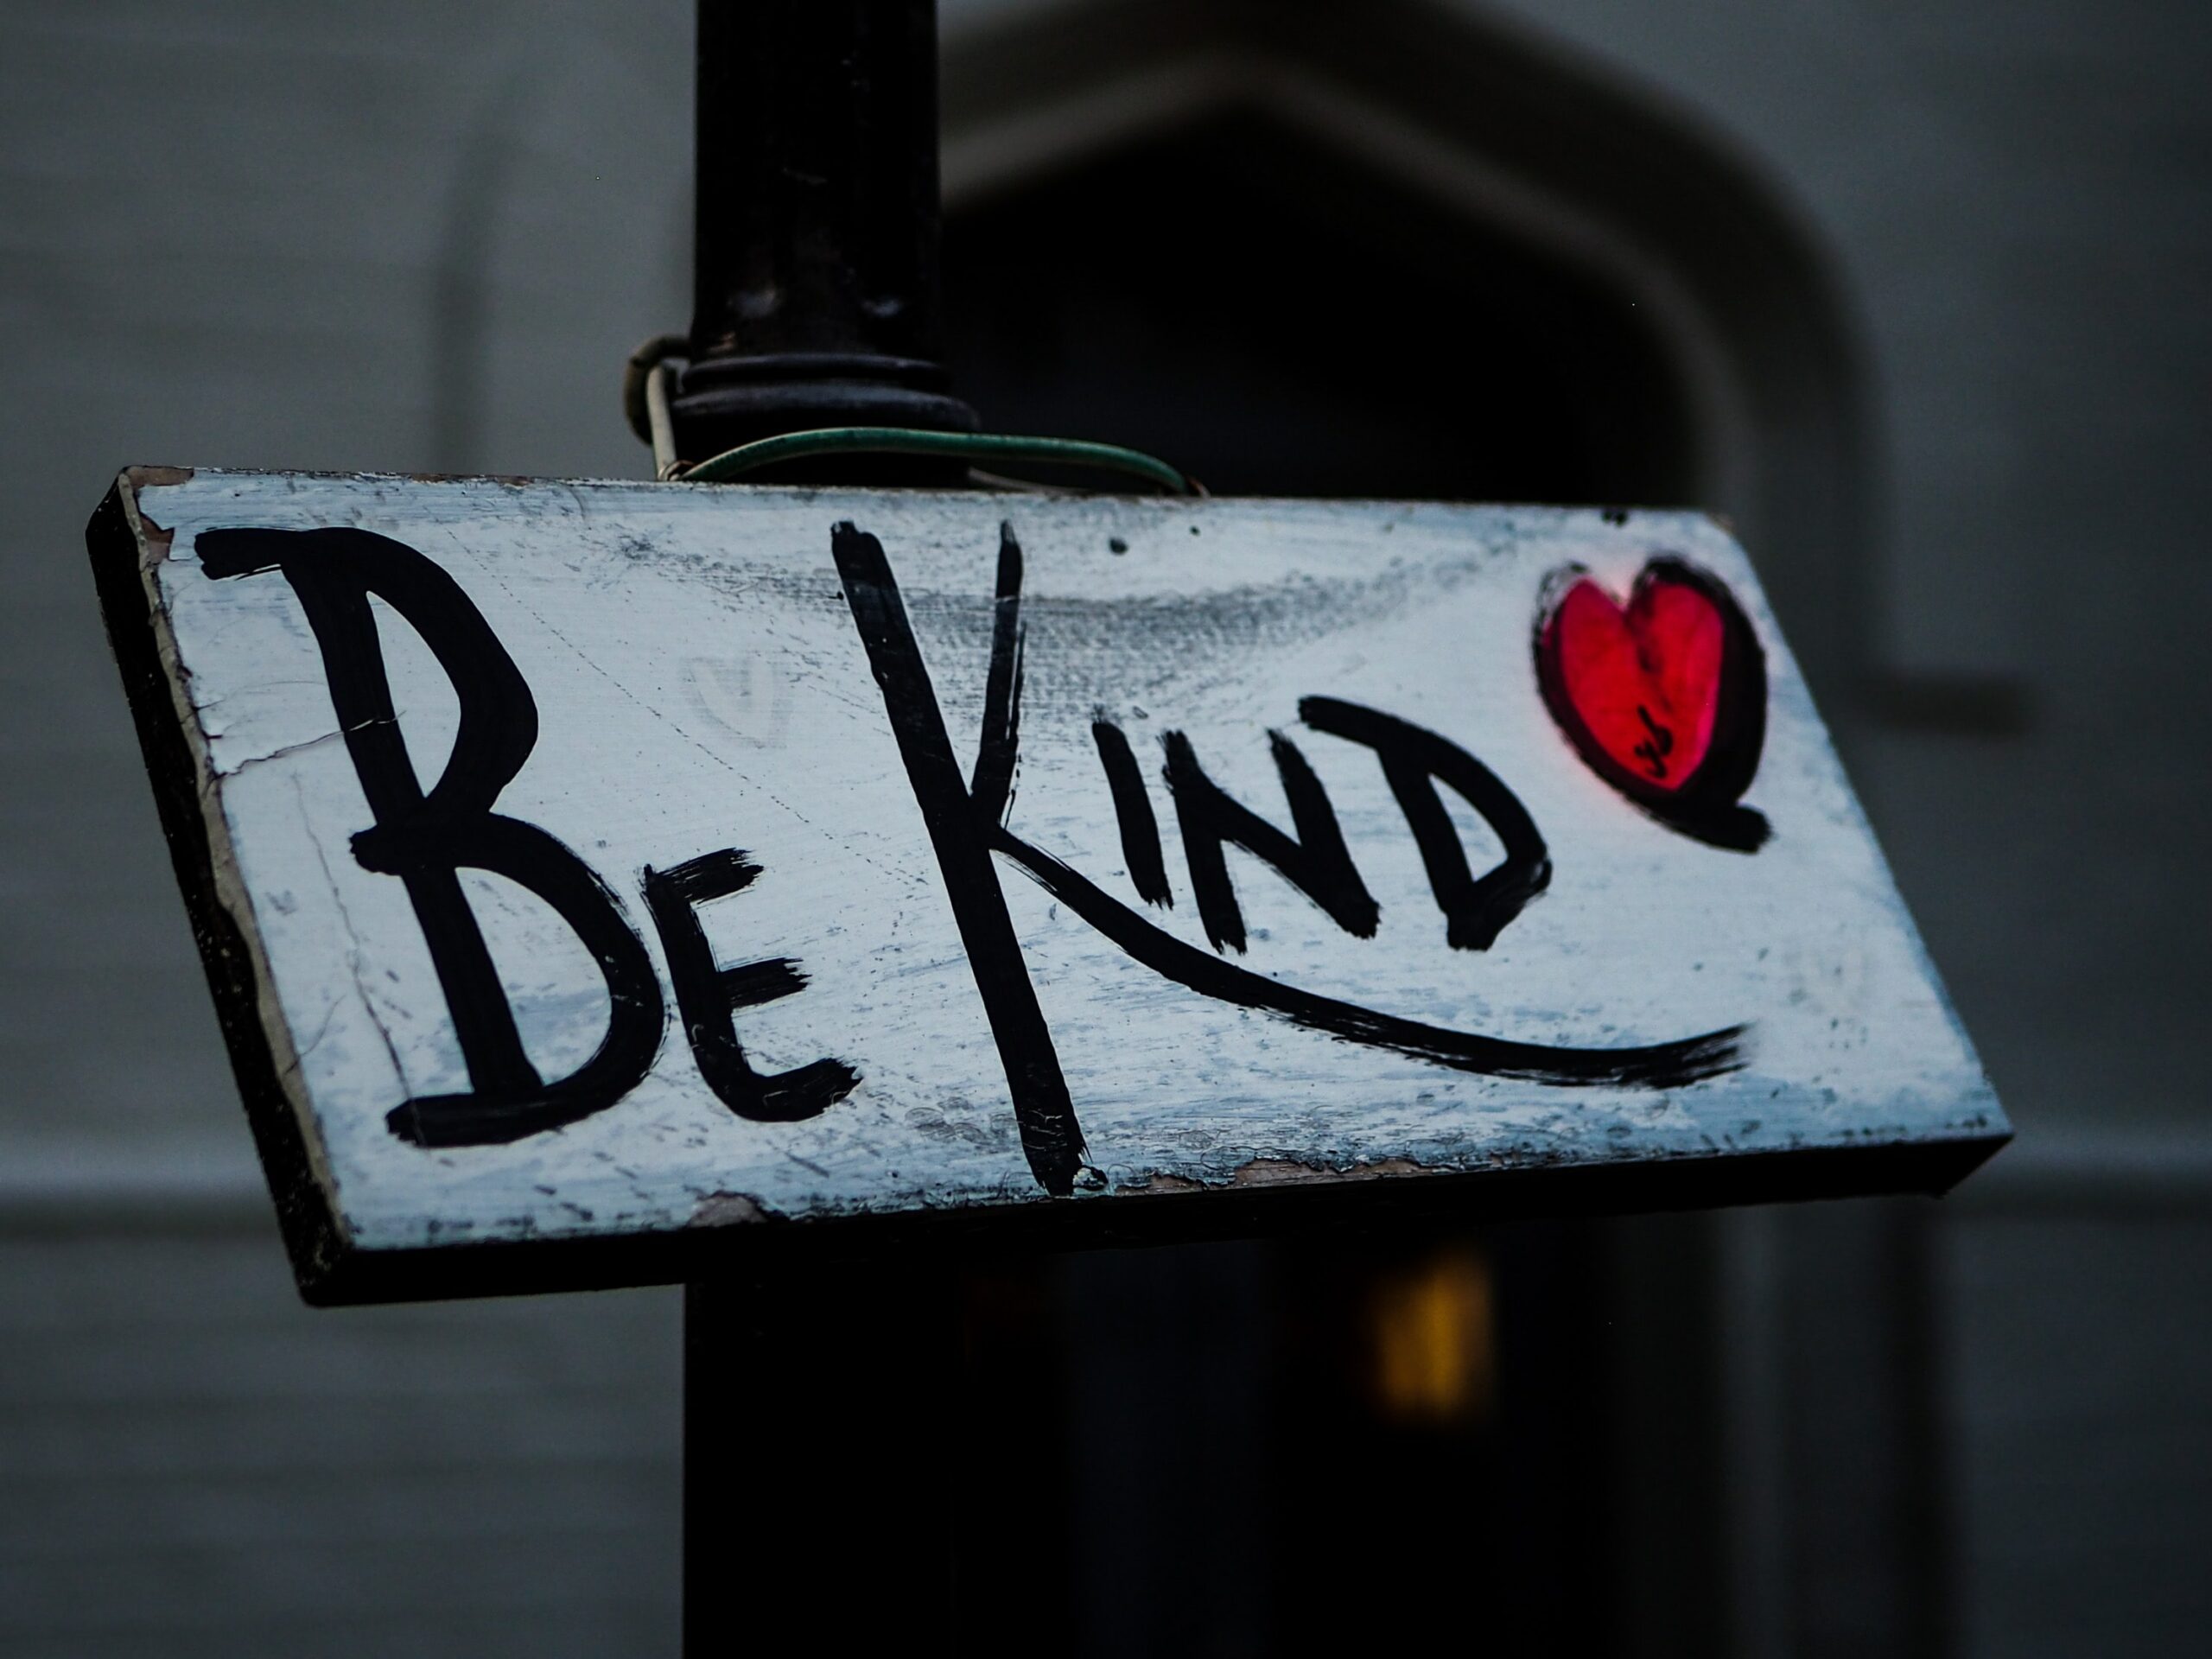 The words "Be Kind" painted on a wooden sign, followed by a heart